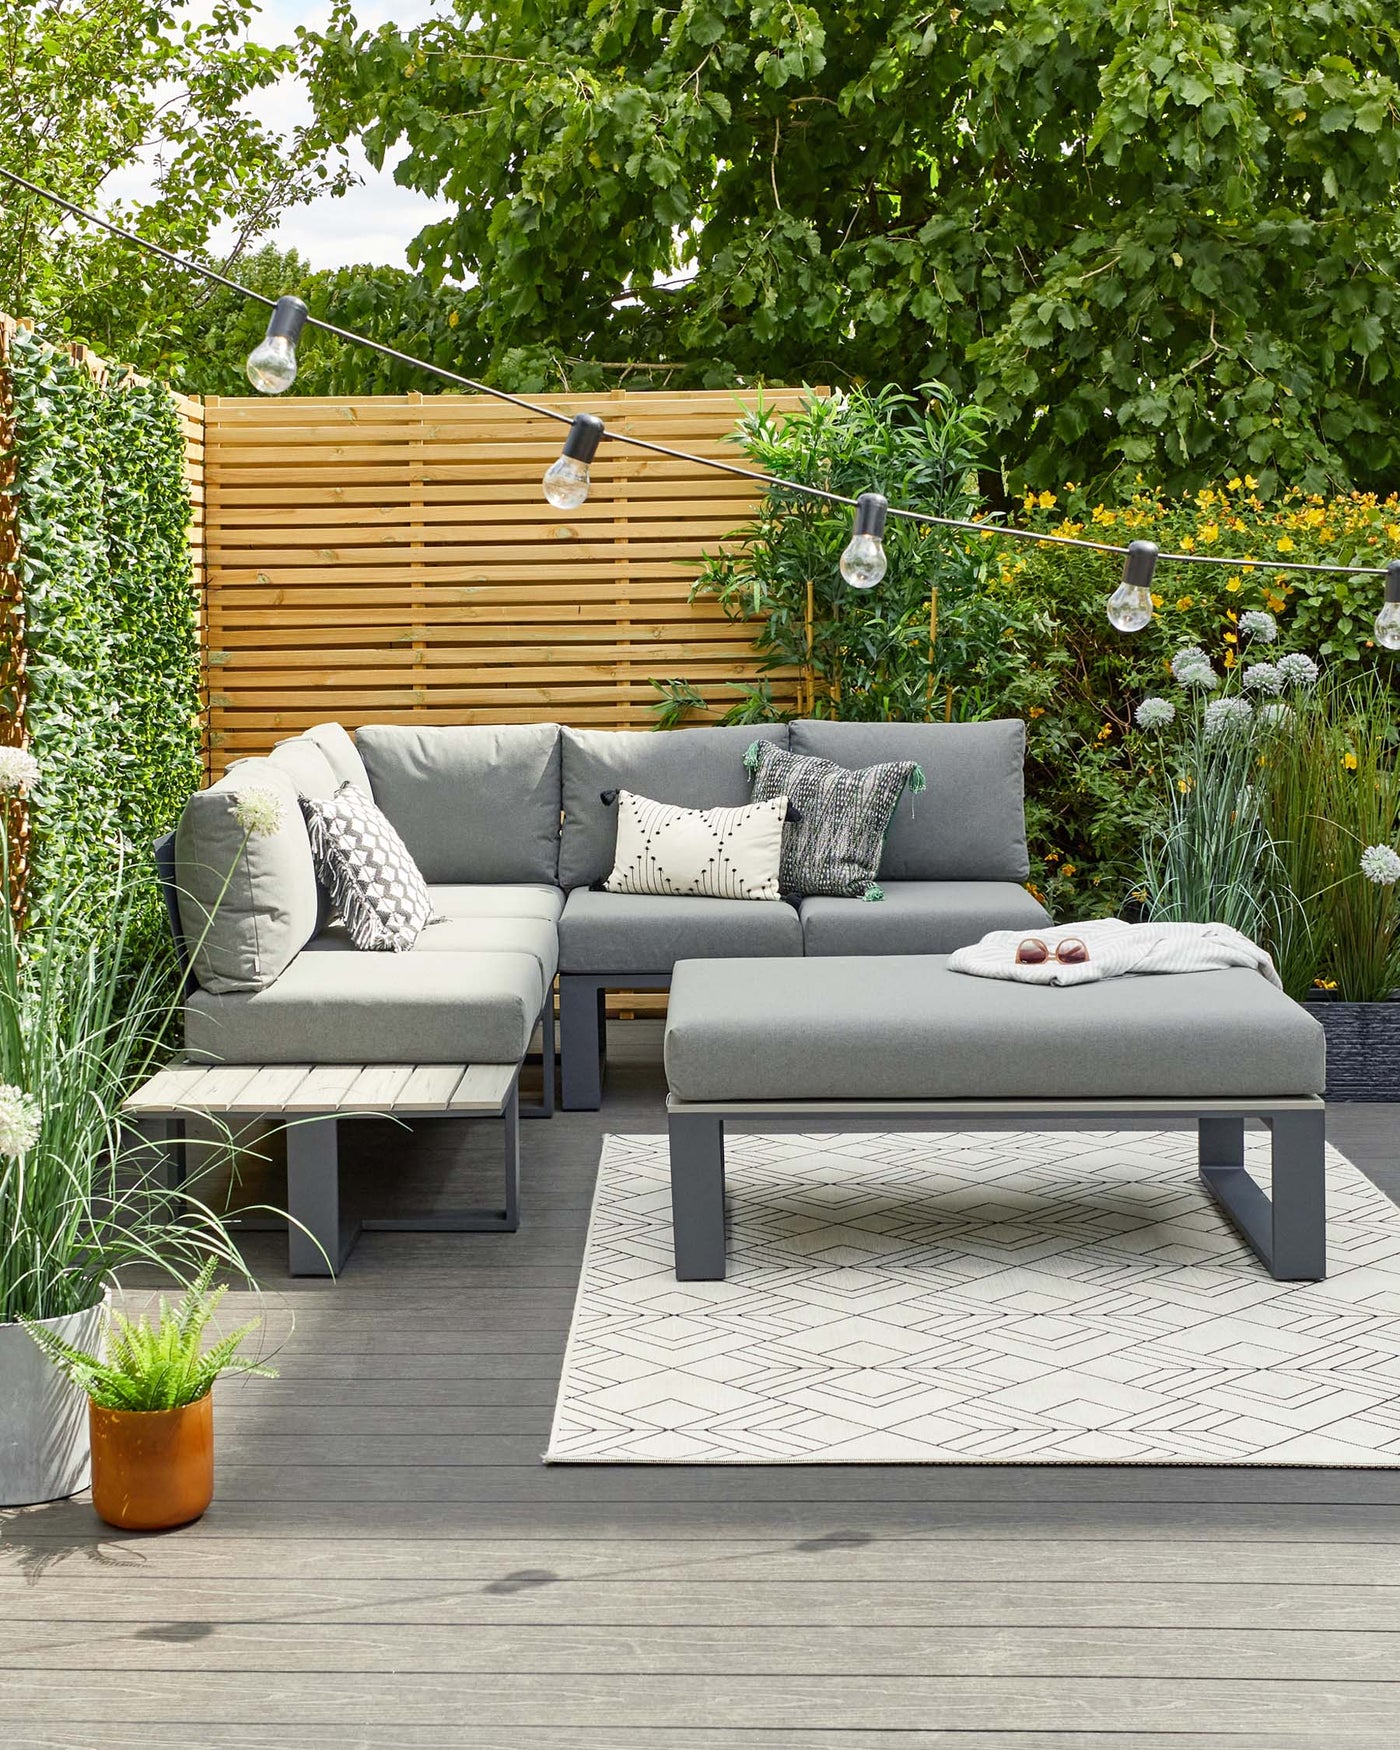 Modern outdoor furniture set featuring a dark grey sectional sofa with light grey cushions and various decorative pillows, accompanied by a matching dark grey rectangular ottoman serving as a coffee table. Set on a geometric patterned outdoor rug.